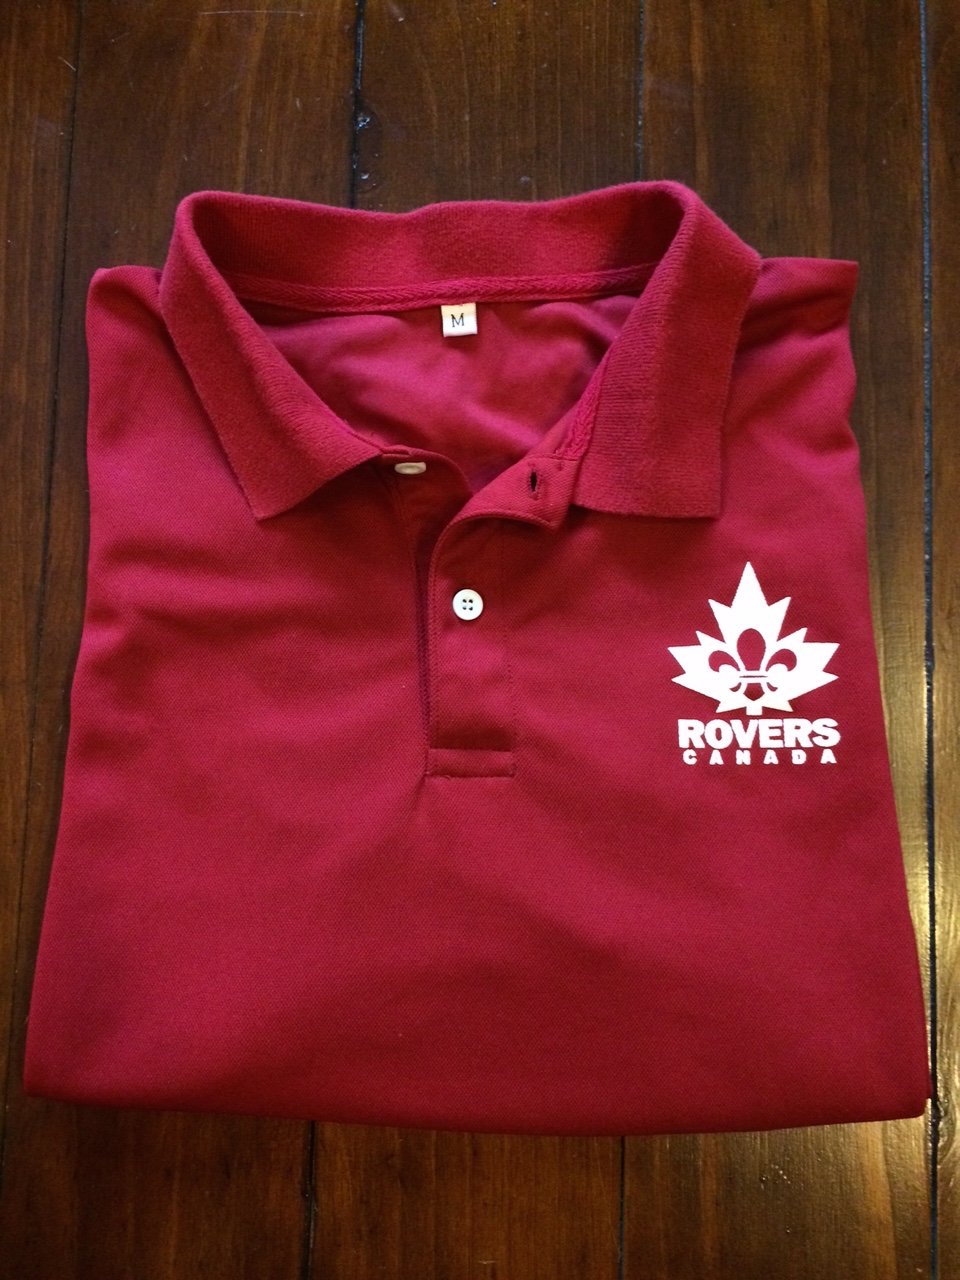 Our red Rover Polo's are a sensible activity uniform option.